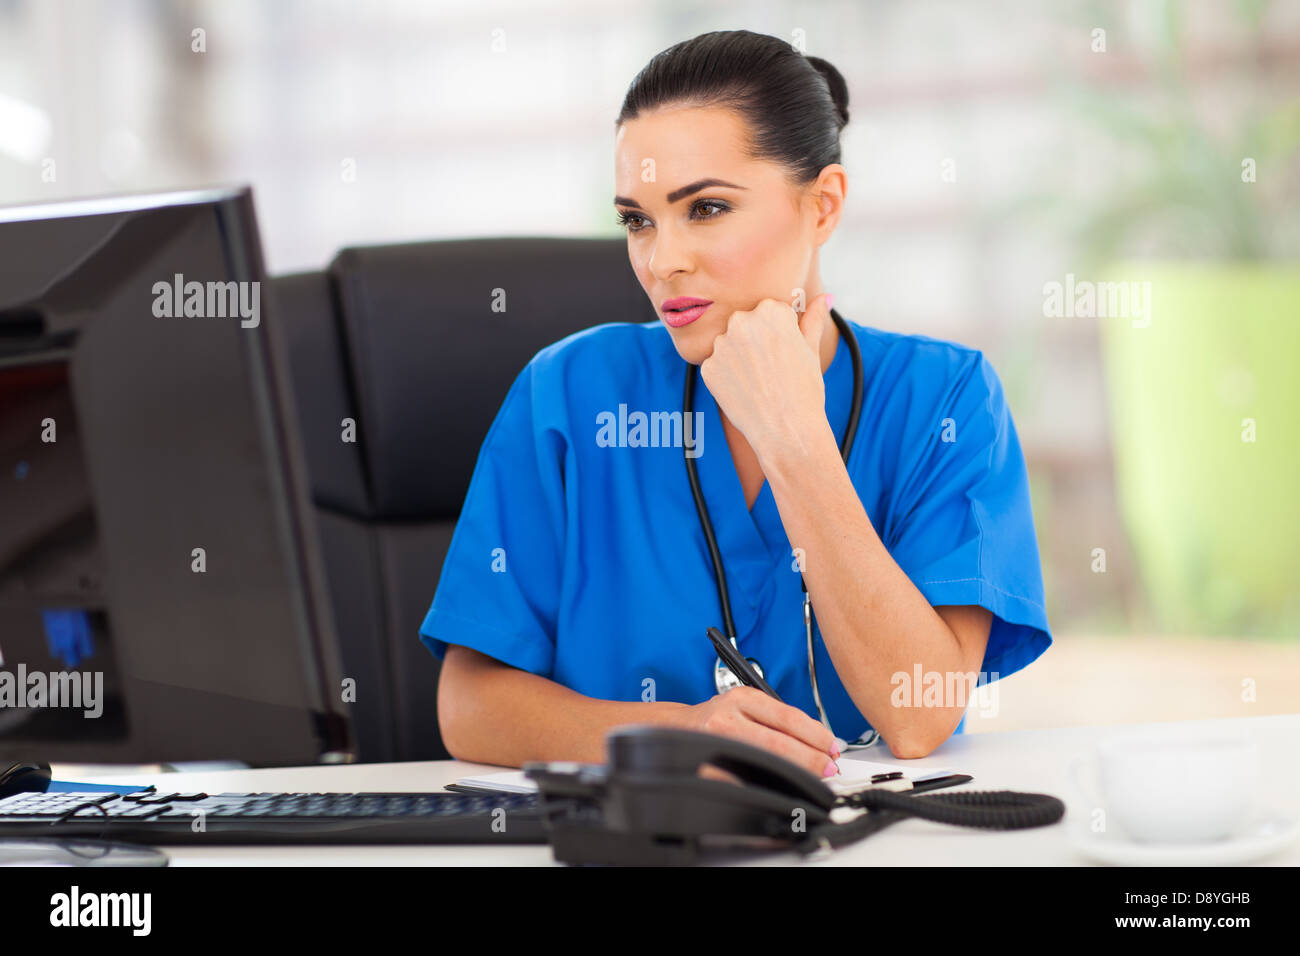 thoughtful medical doctor looking at computer screen in office Stock Photo